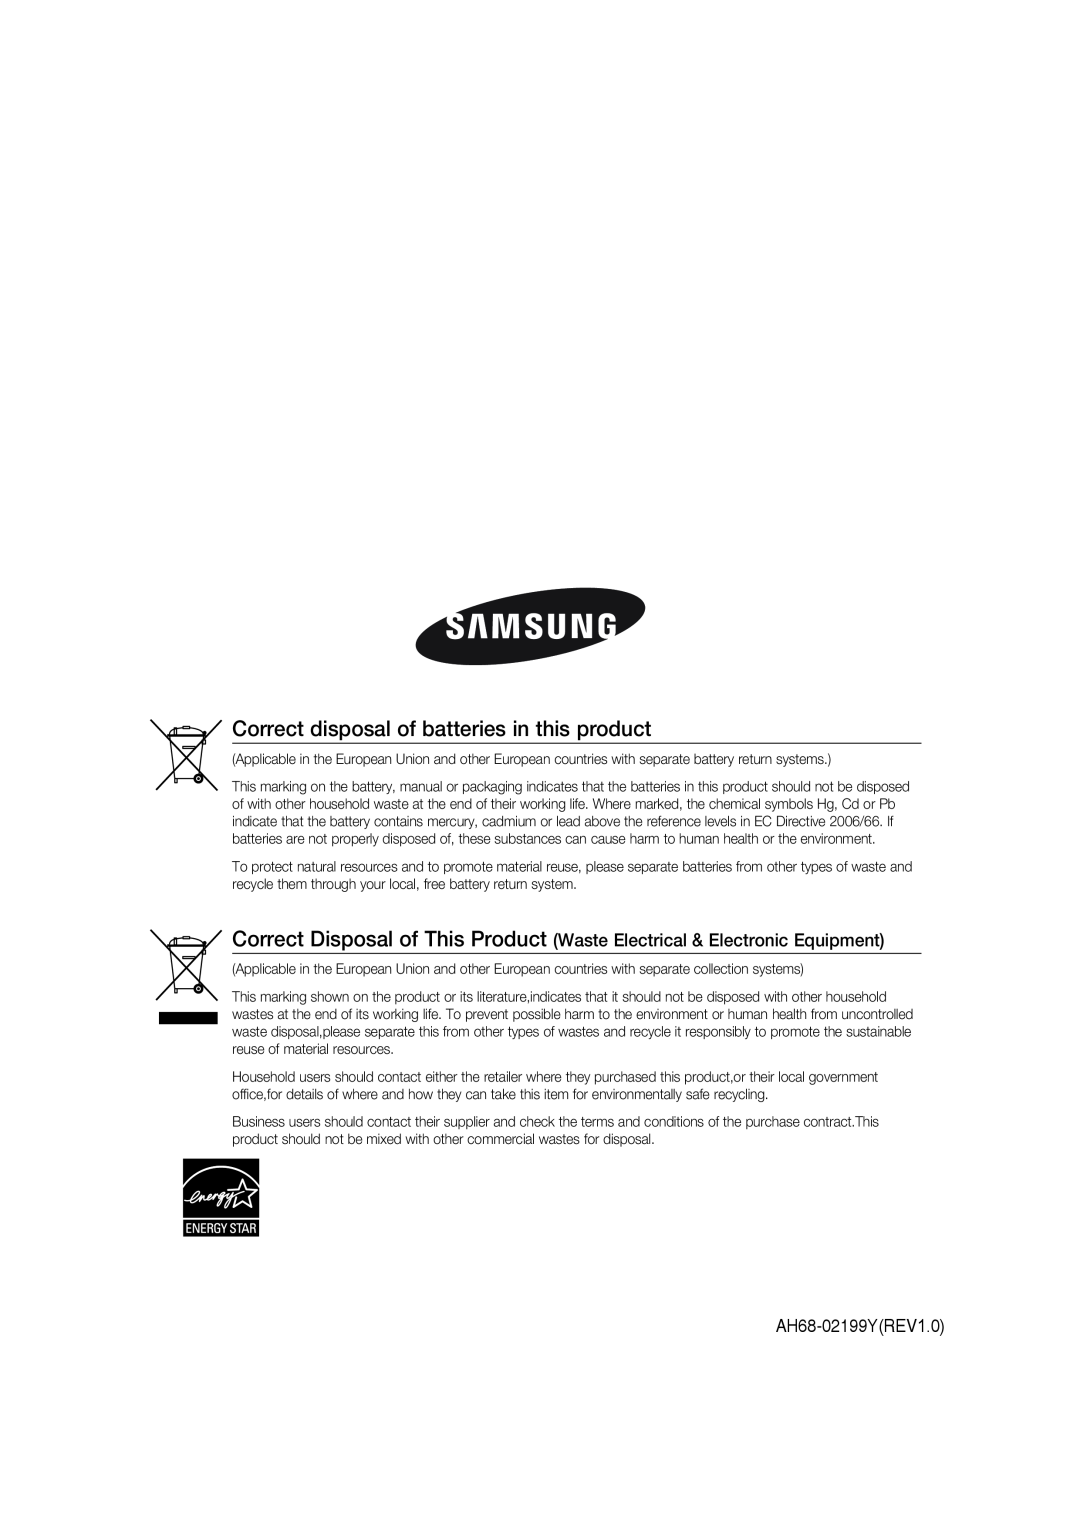 Samsung MM-G35 user manual Correct disposal of batteries in this product, AH68-02199YREV1.0 